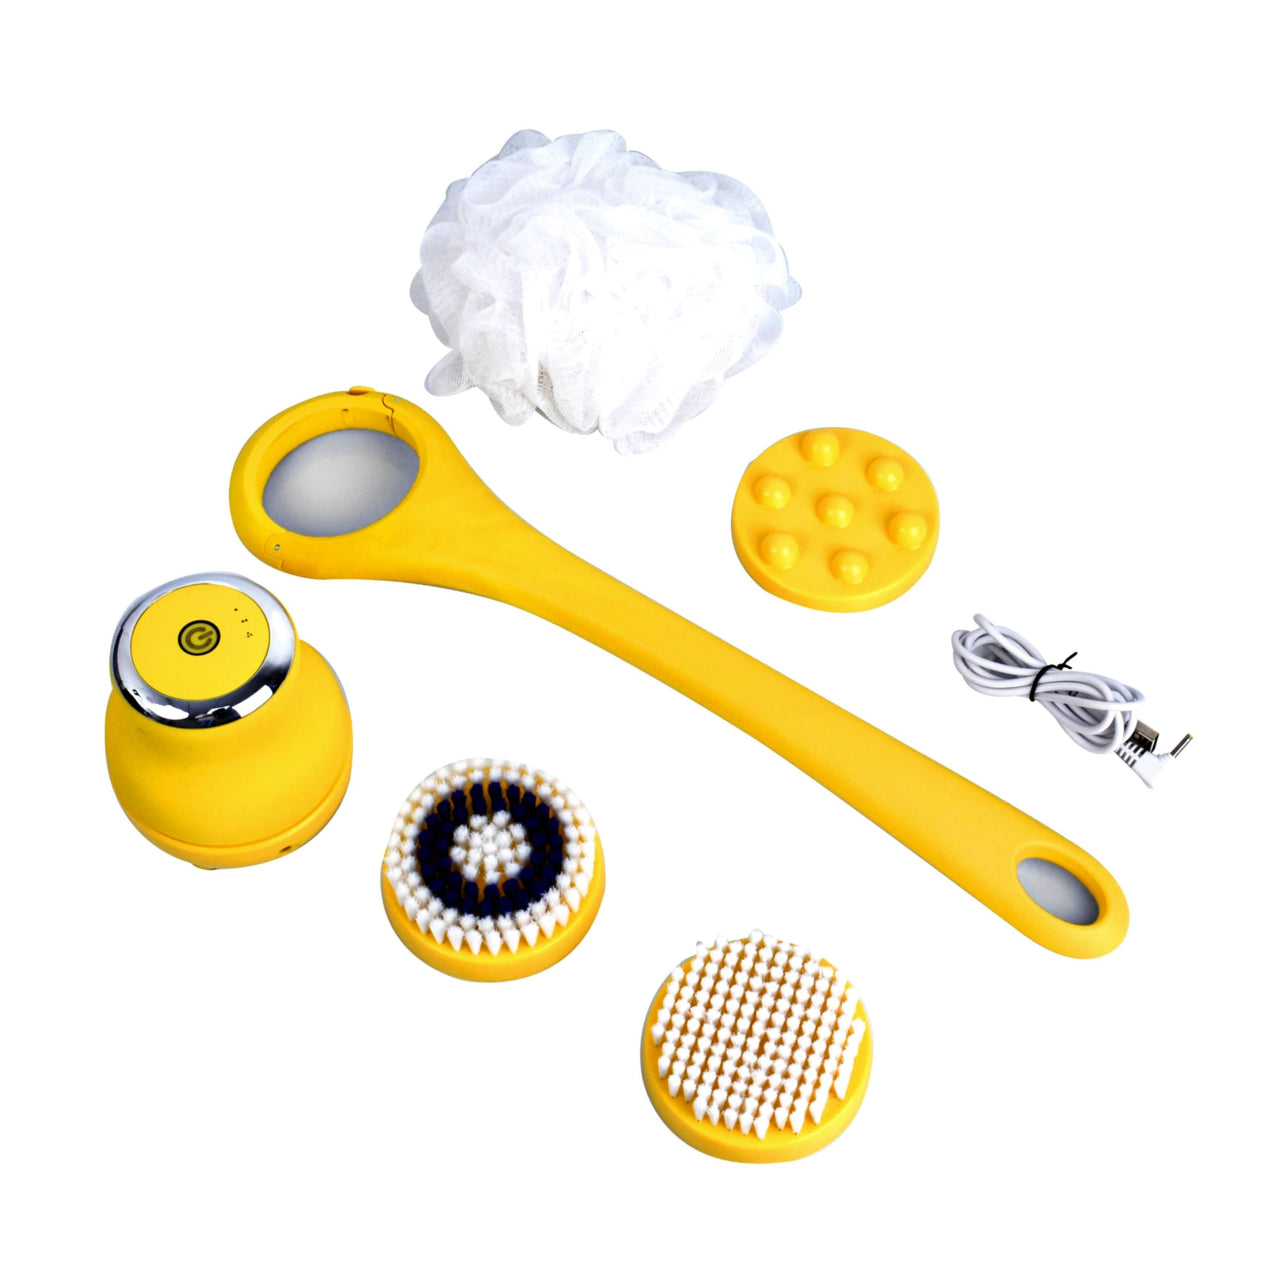 Wireless Waterproof Cleansing and Exfoliating Body Brush Set with 3 Speed 4 Brush Heads Yellow